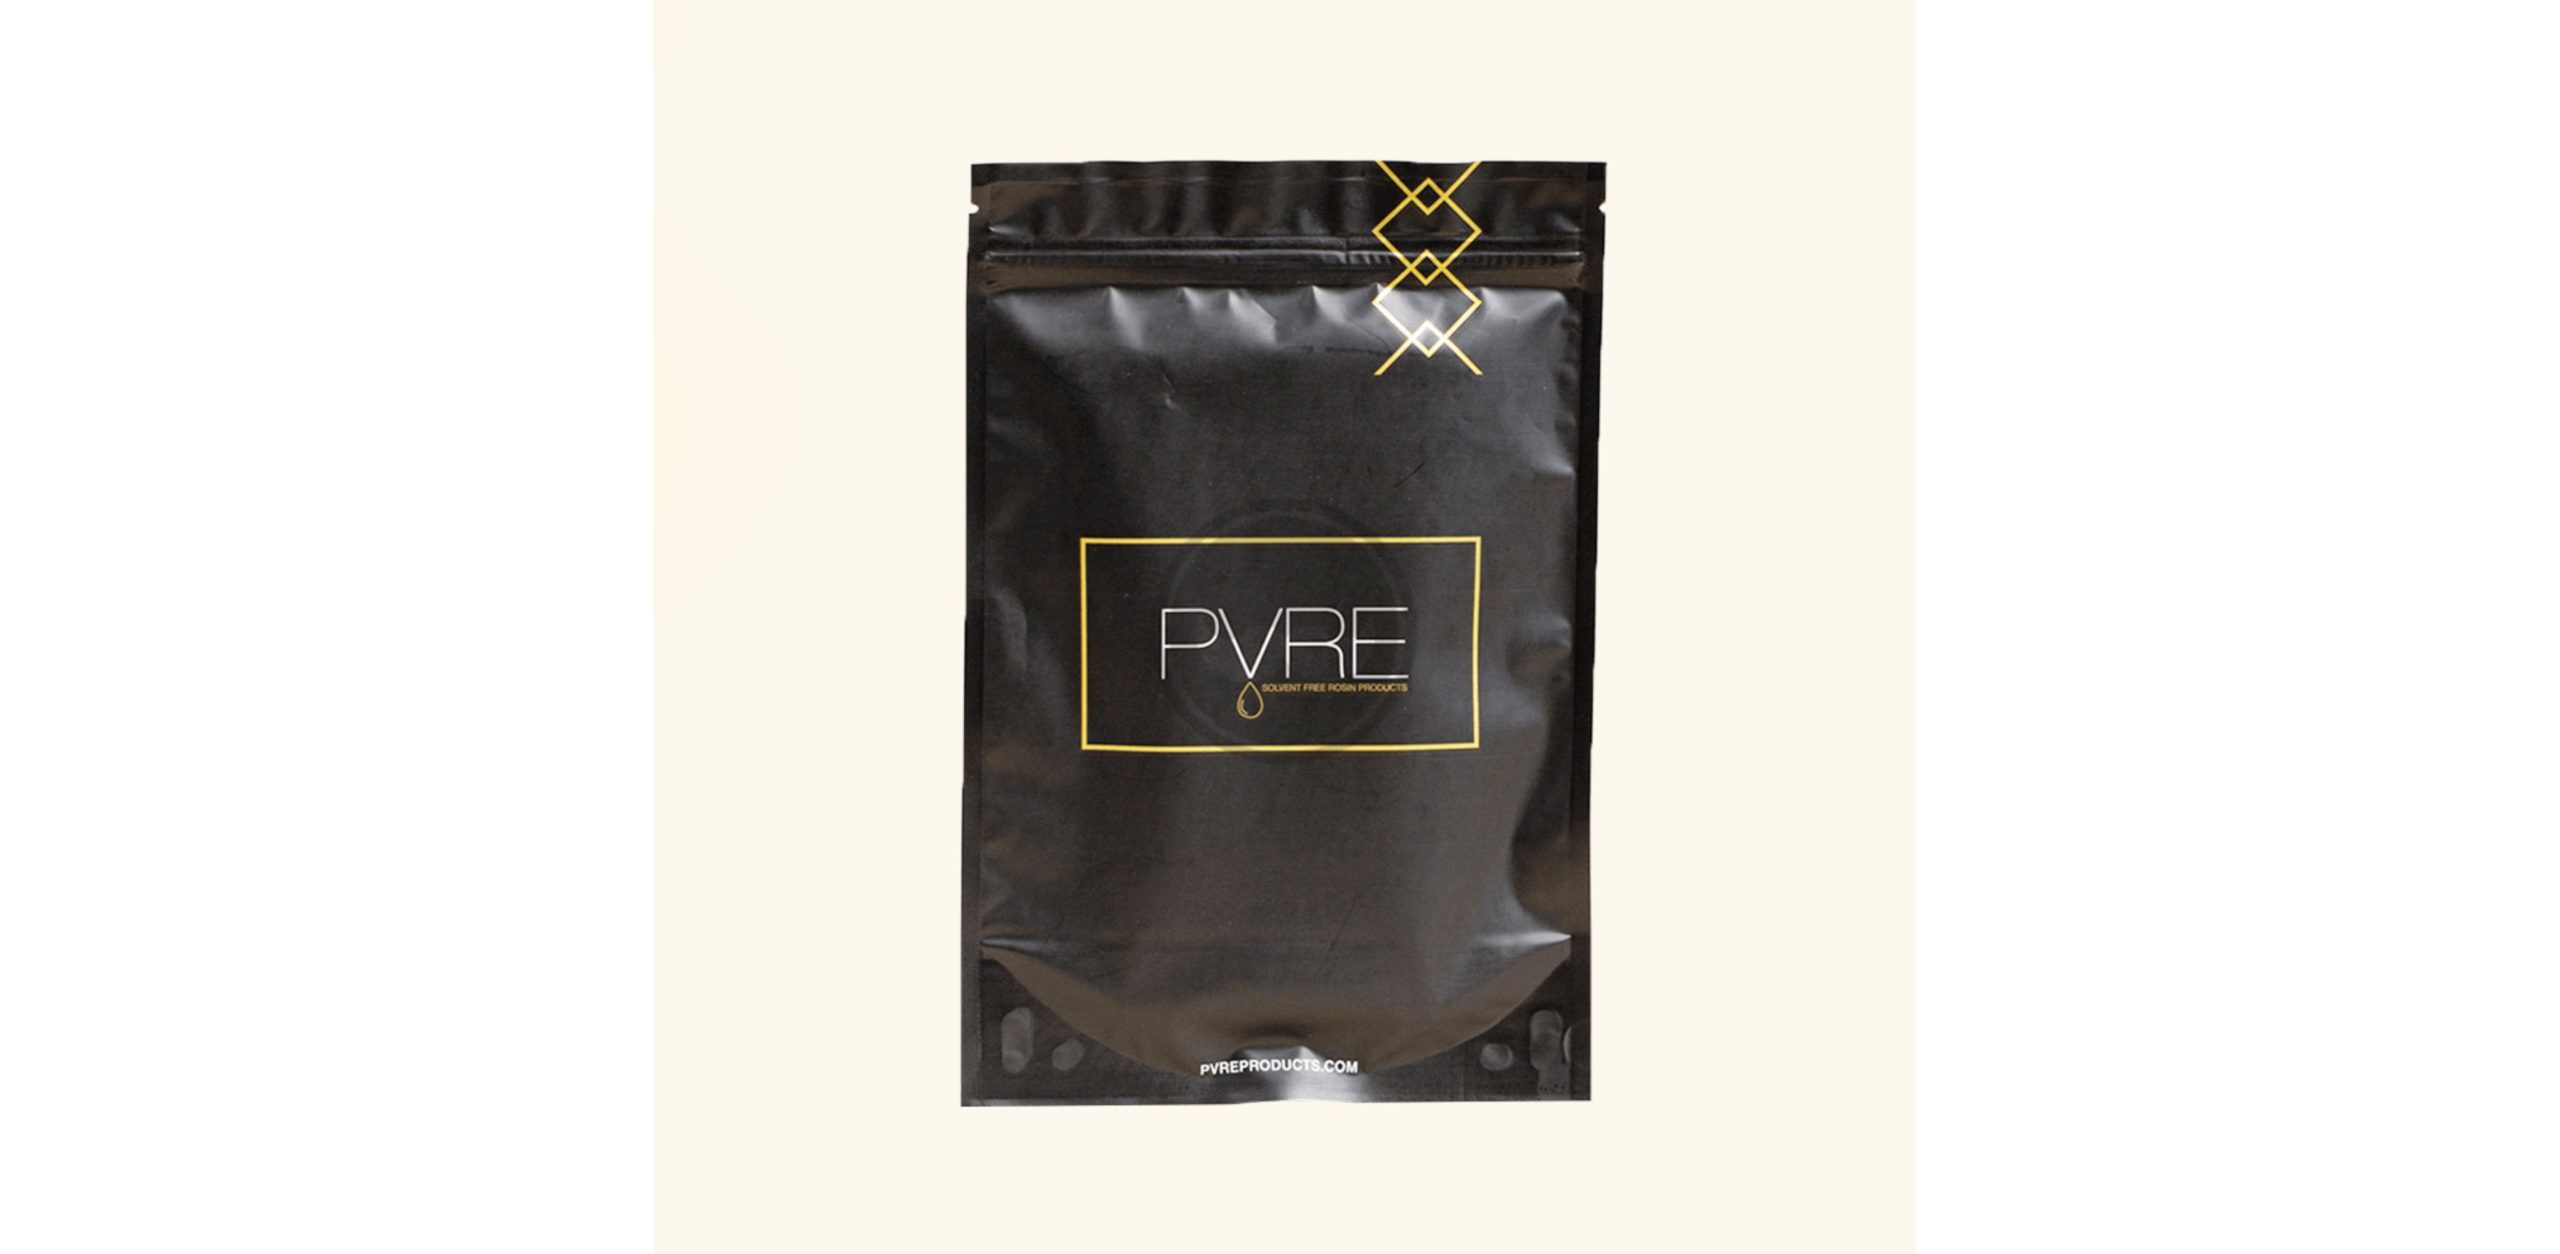 The PVRE Milk Chocolate with Hazelnut Double Dose 1600MG isn't a chocolate bar for the faint. The weed chocolate bar packs quite the punch with each square at 66mg THC. 